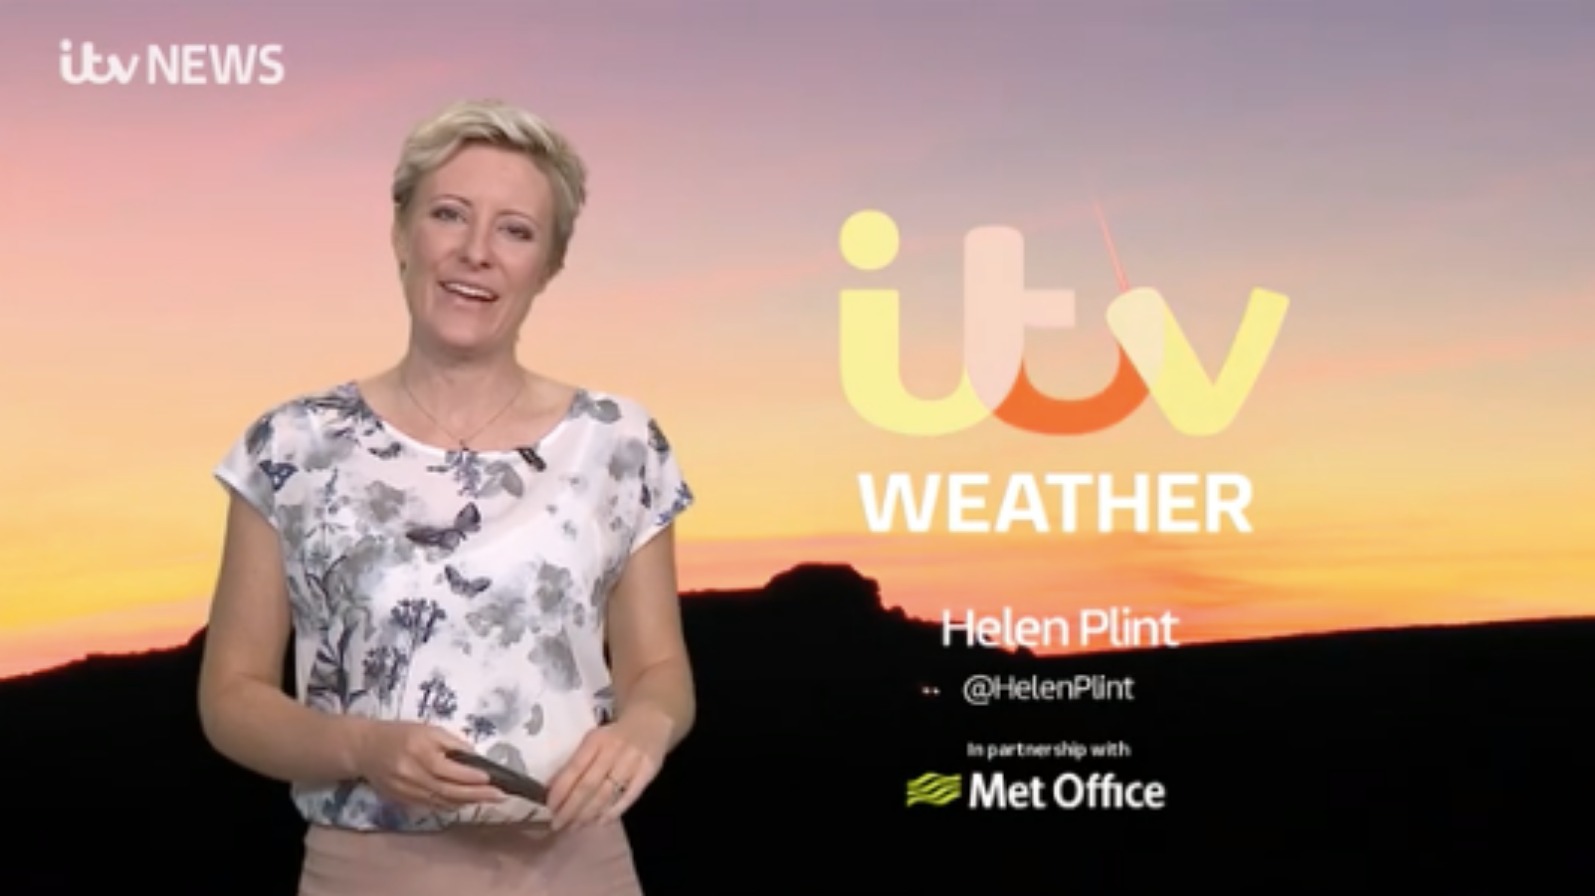 UK weather. Calendar weather. Dry with variable cloud cover through the